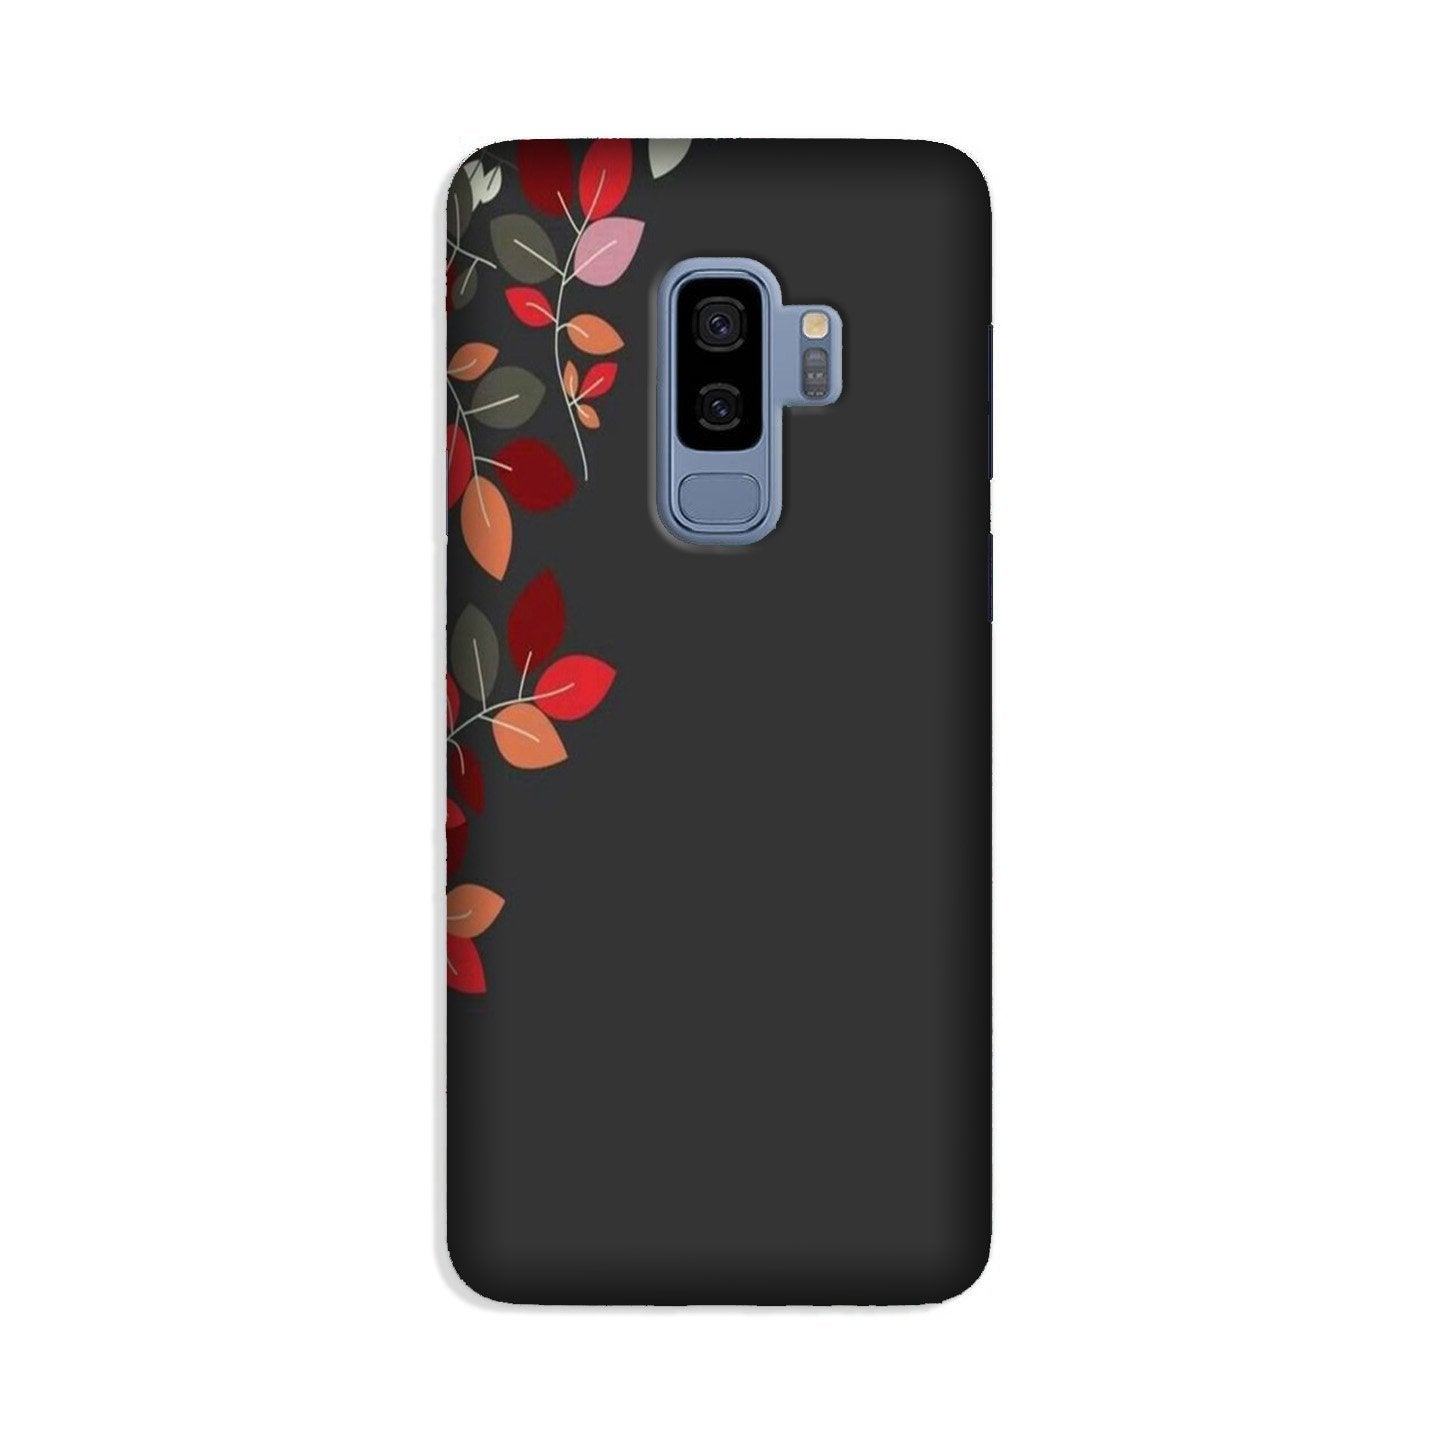 Grey Background Case for Galaxy S9 Plus